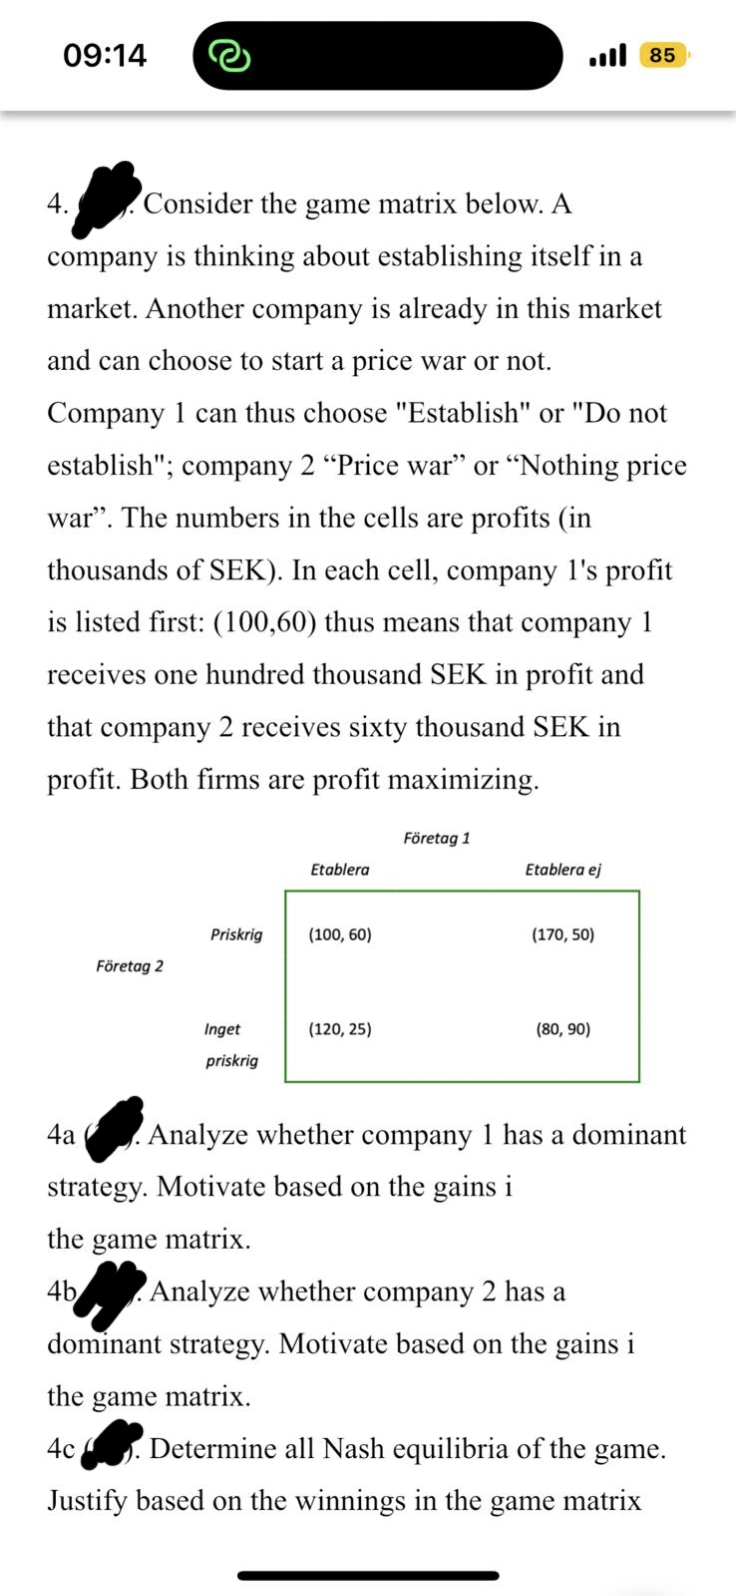 09:14
4.
Consider the game matrix below. A
company is thinking about establishing itself in a
market. Another company is already in this market
and can choose to start a price war or not.
Company 1 can thus choose "Establish" or "Do not
establish"; company 2 "Price war" or "Nothing price
war". The numbers in the cells are profits (in
thousands of SEK). In each cell, company 1's profit
is listed first: (100,60) thus means that company 1
receives one hundred thousand SEK in profit and
that company 2 receives sixty thousand SEK in
profit. Both firms are profit maximizing.
4a
Företag 2
Priskrig
Inget
priskrig
Etablera
(100, 60)
(120, 25)
Företag 1
Etablera ej
strategy. Motivate based on the gains i
the game matrix.
4b
(170, 50)
85
(80, 90)
Analyze whether company 1 has a dominant
Analyze whether company 2 has a
dominant strategy. Motivate based on the gains i
the game matrix.
4c
Determine all Nash equilibria of the game.
Justify based on the winnings in the game matrix